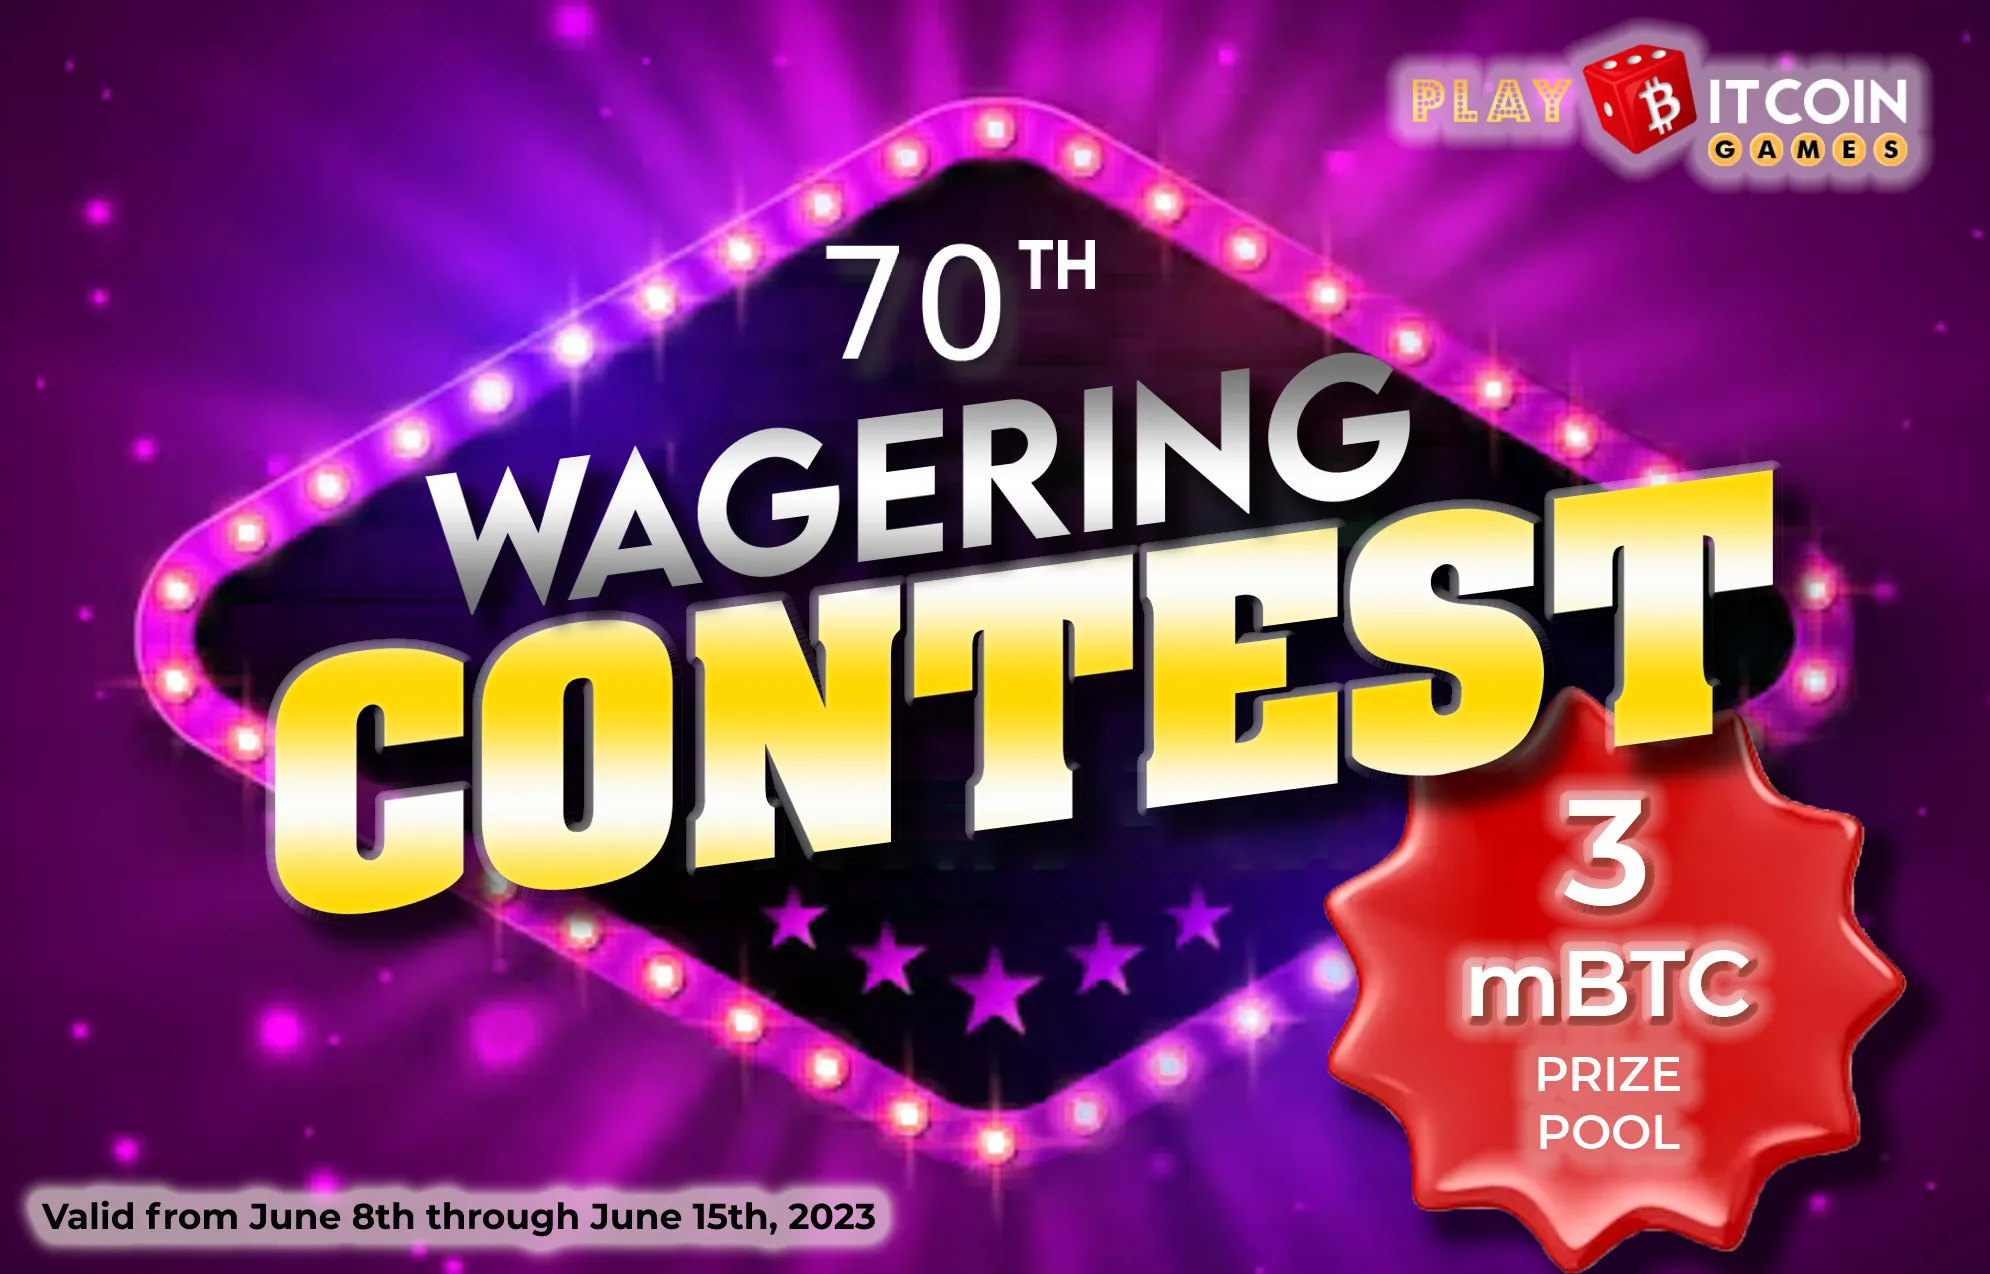 70th wagering competition - playbitcoingames.com